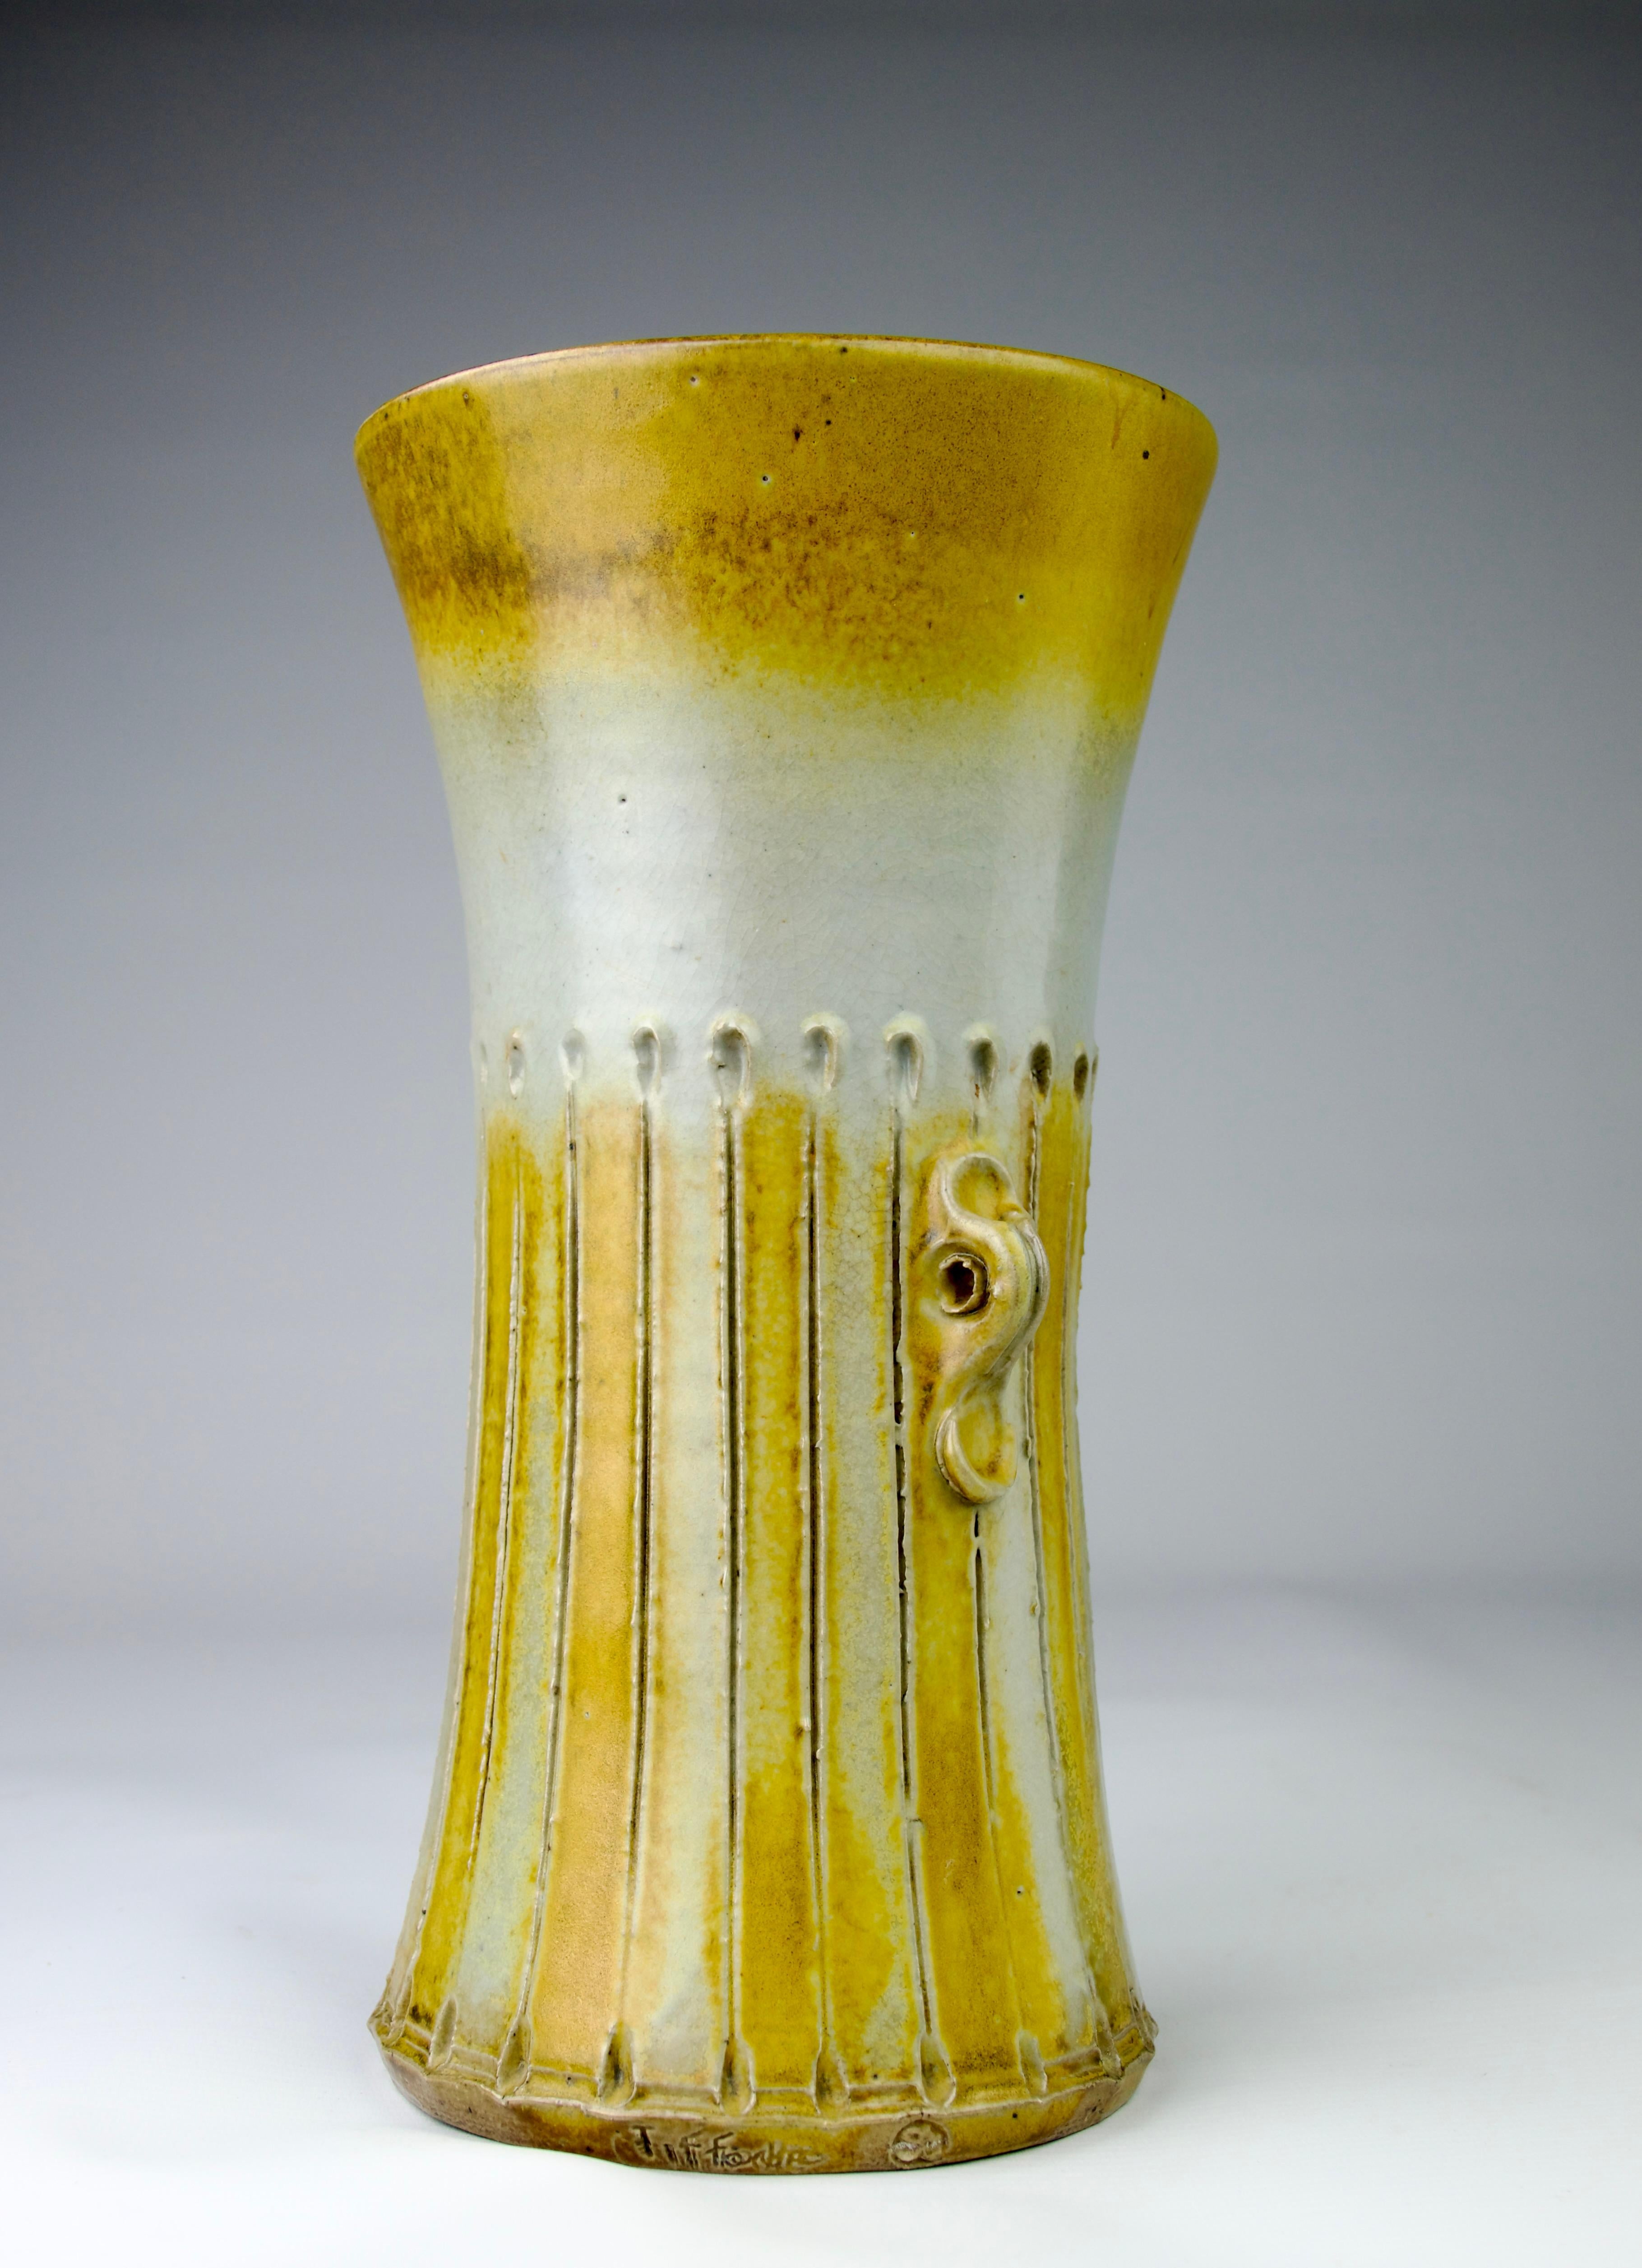 Superb Gustave Tiffoche ceramic stoneware long vase. Striated decorations and small handles on the side punctuated by colourful hues of yellow, brown and white.

Dimensions in cm ( H x D ) : 29.2 x 14

In excellent condition.

Secure